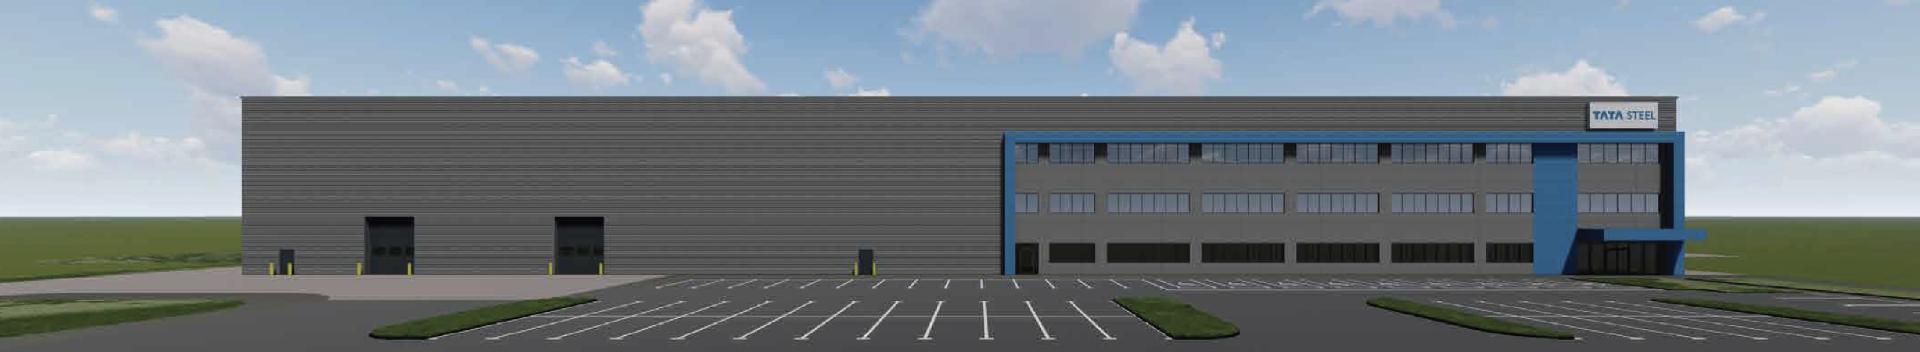 Corby's new facility will be funded by £12m from a land sale